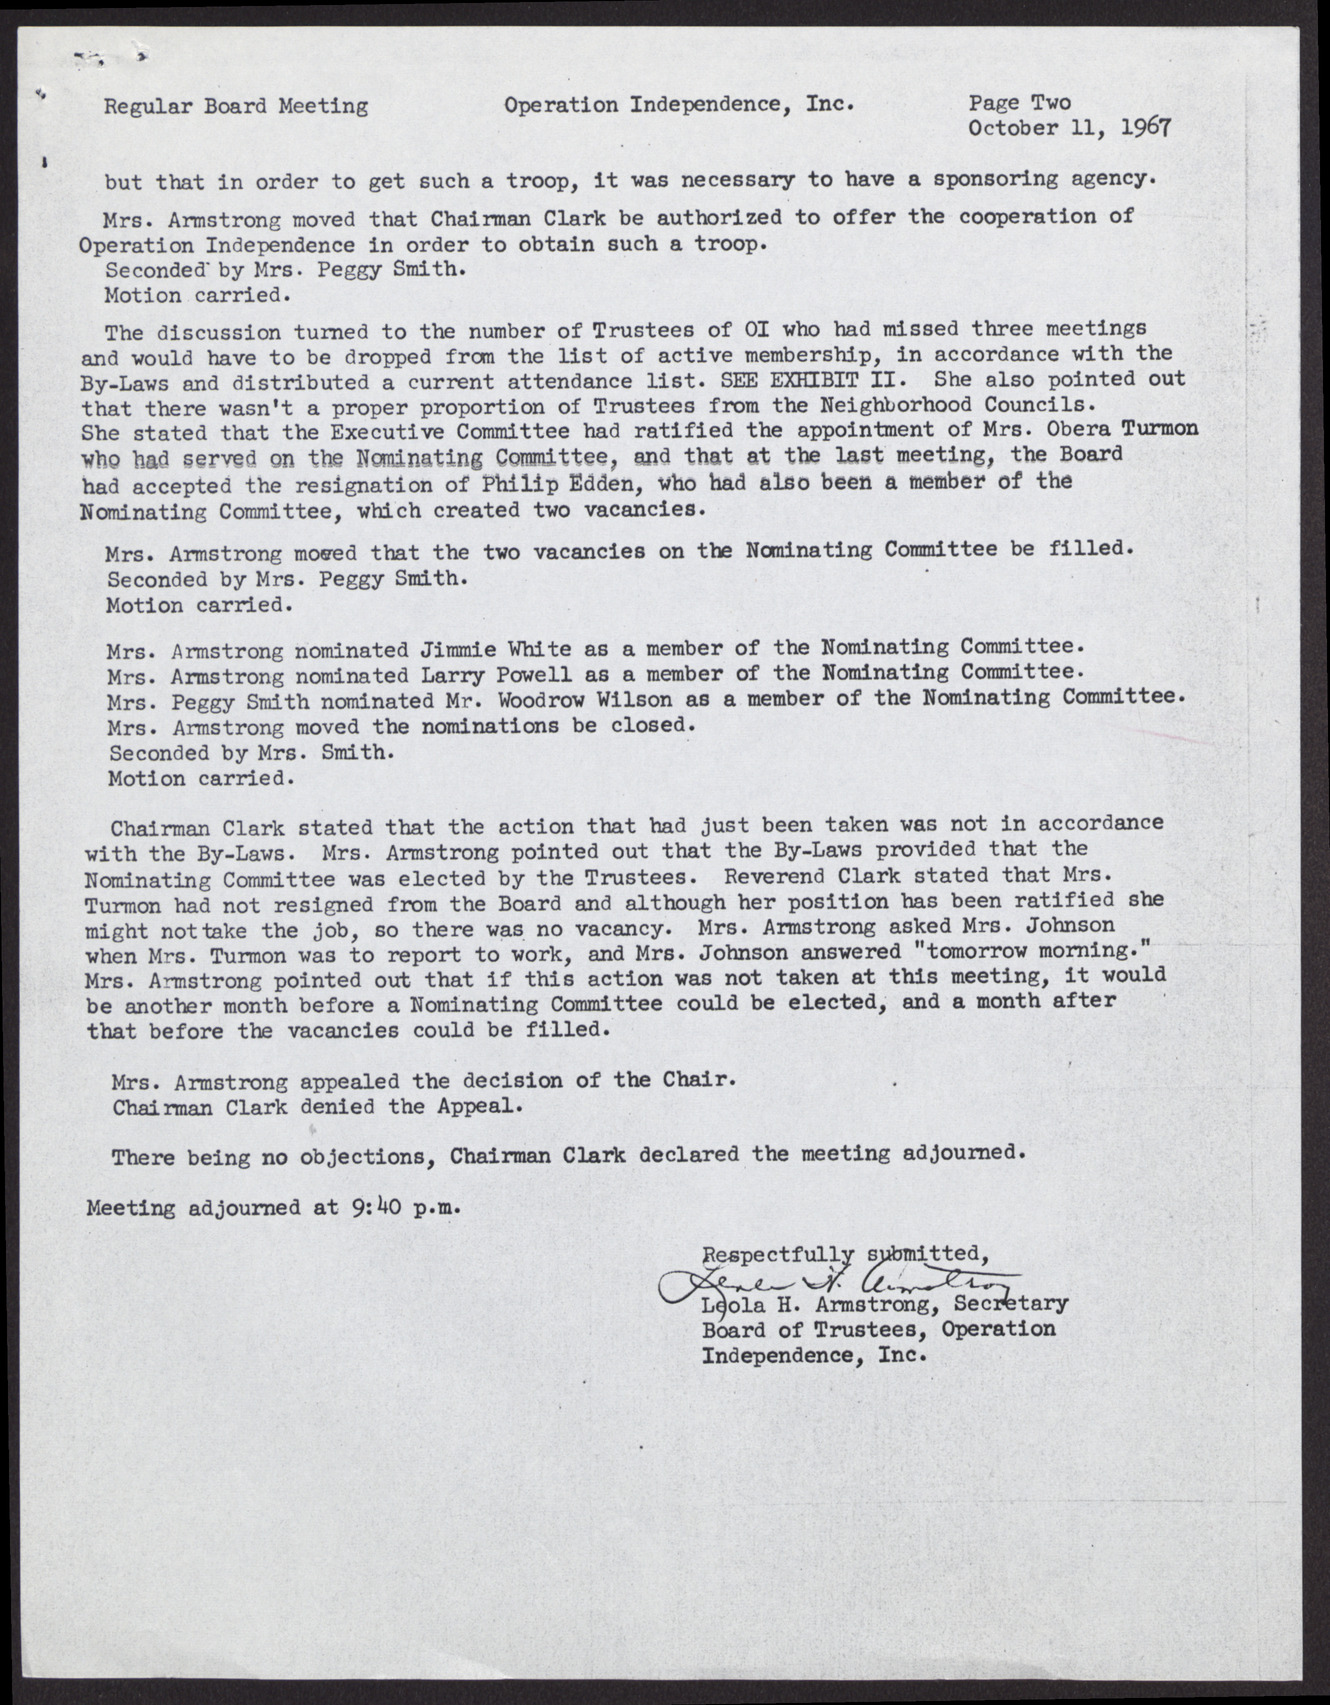 Minutes from Operation Independence, Inc. Regular Board Meeting; Progress Report; and Attendance Sheet (4 pages), October 11, 1967, page 2